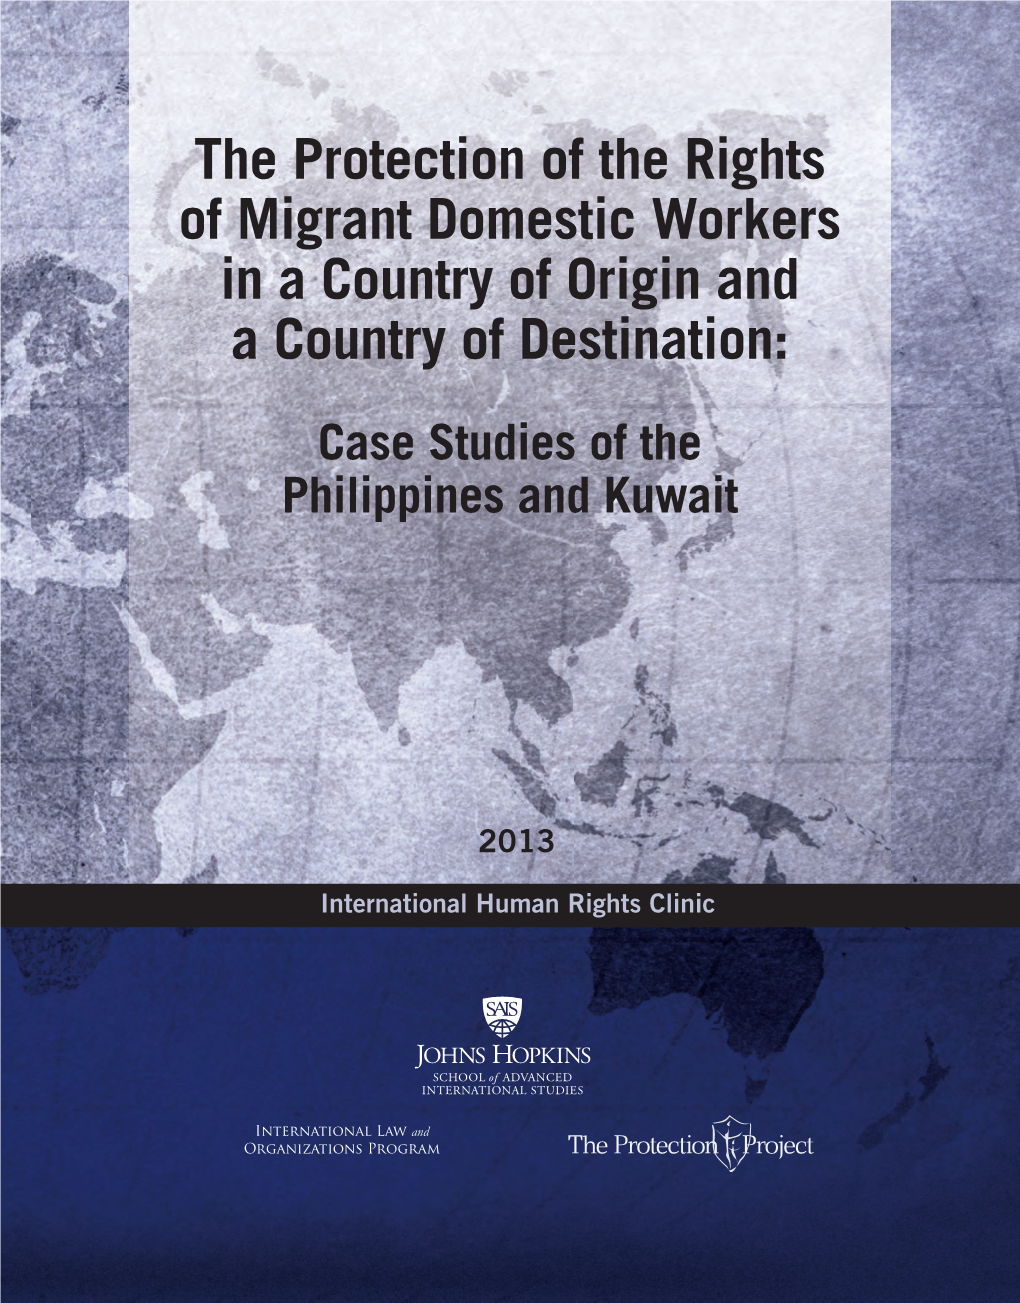 The Protection of the Rights of Migrant Domestic Workers in a Country of Origin and a Country of Destination